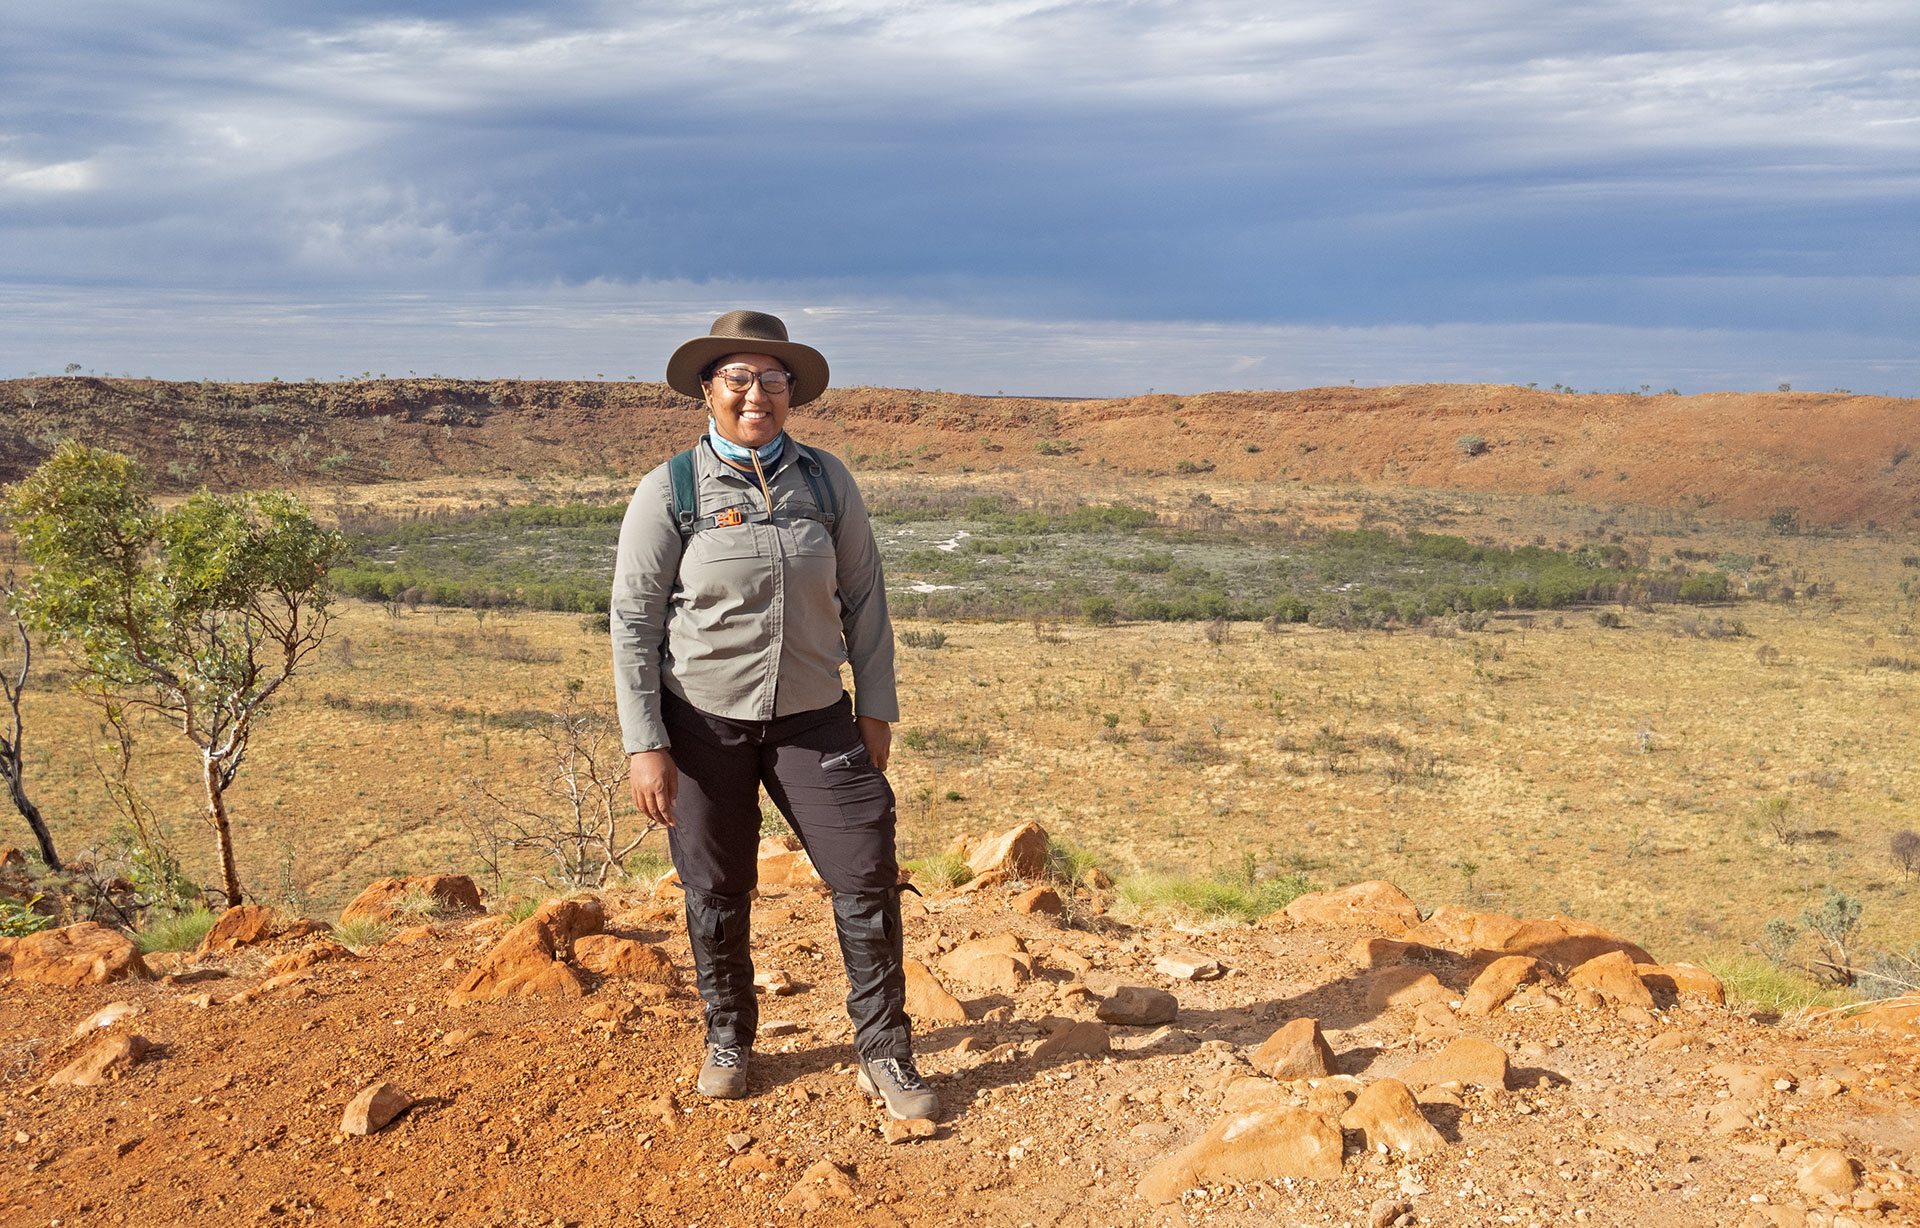 Tanisha Williams, featured in the women and environment series at The Morton Arboretum, is in Wolfe Creek Crater, Australia